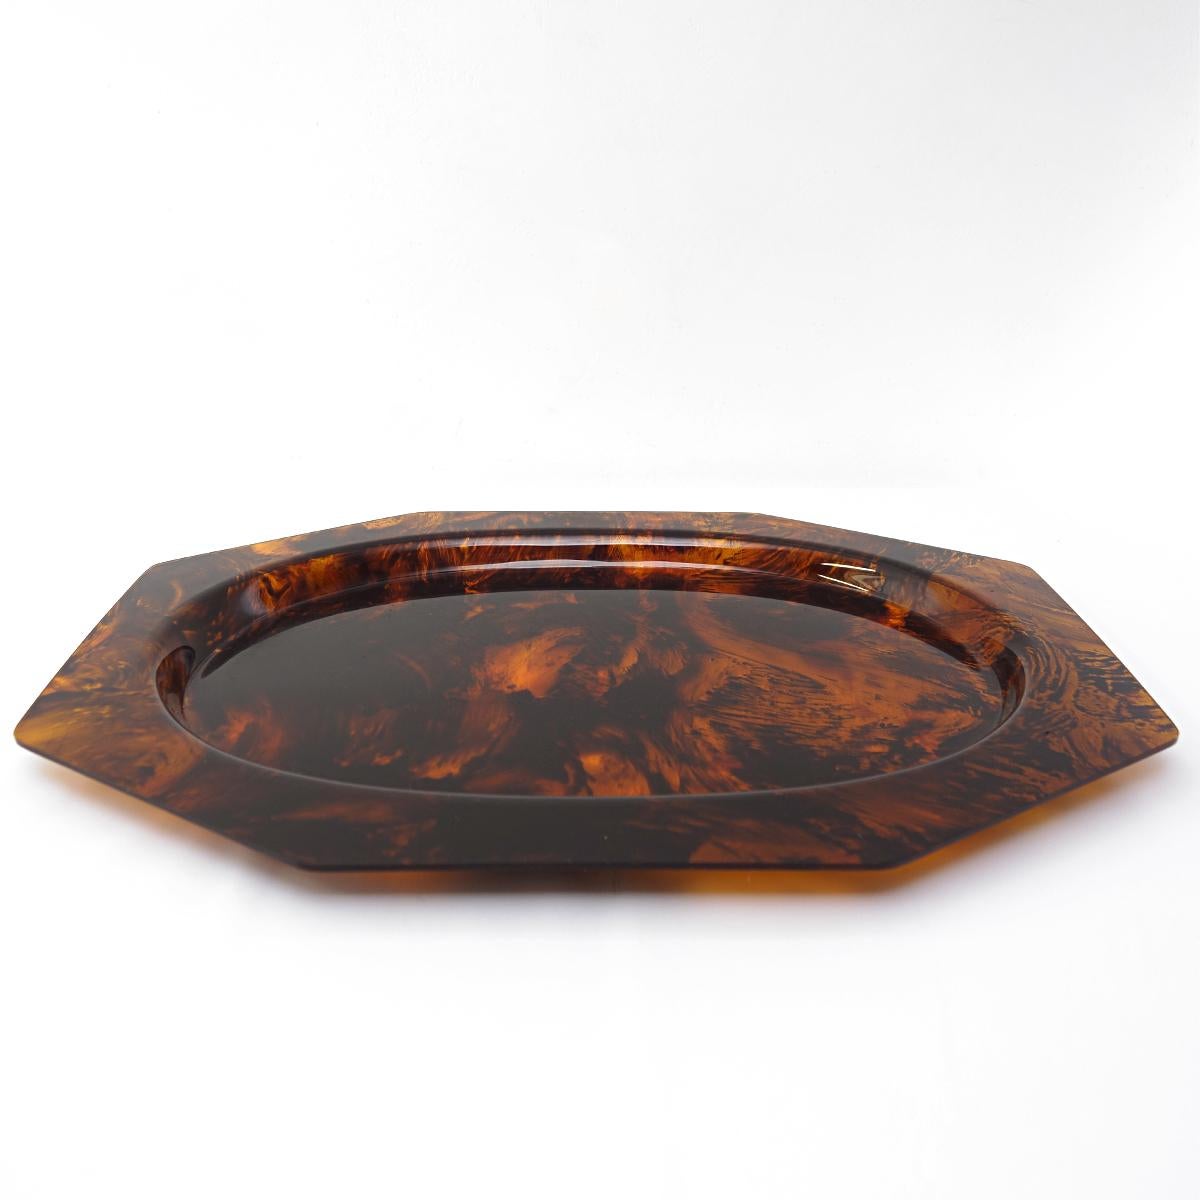 This large tray from the 1970s is round on the inside and octagonal on the outside. It is made of lucite that has been given a faux tortoise decor, the same decor the four matching plates were given. 

Measurements of the plates:
Diameter 33.5 cm,